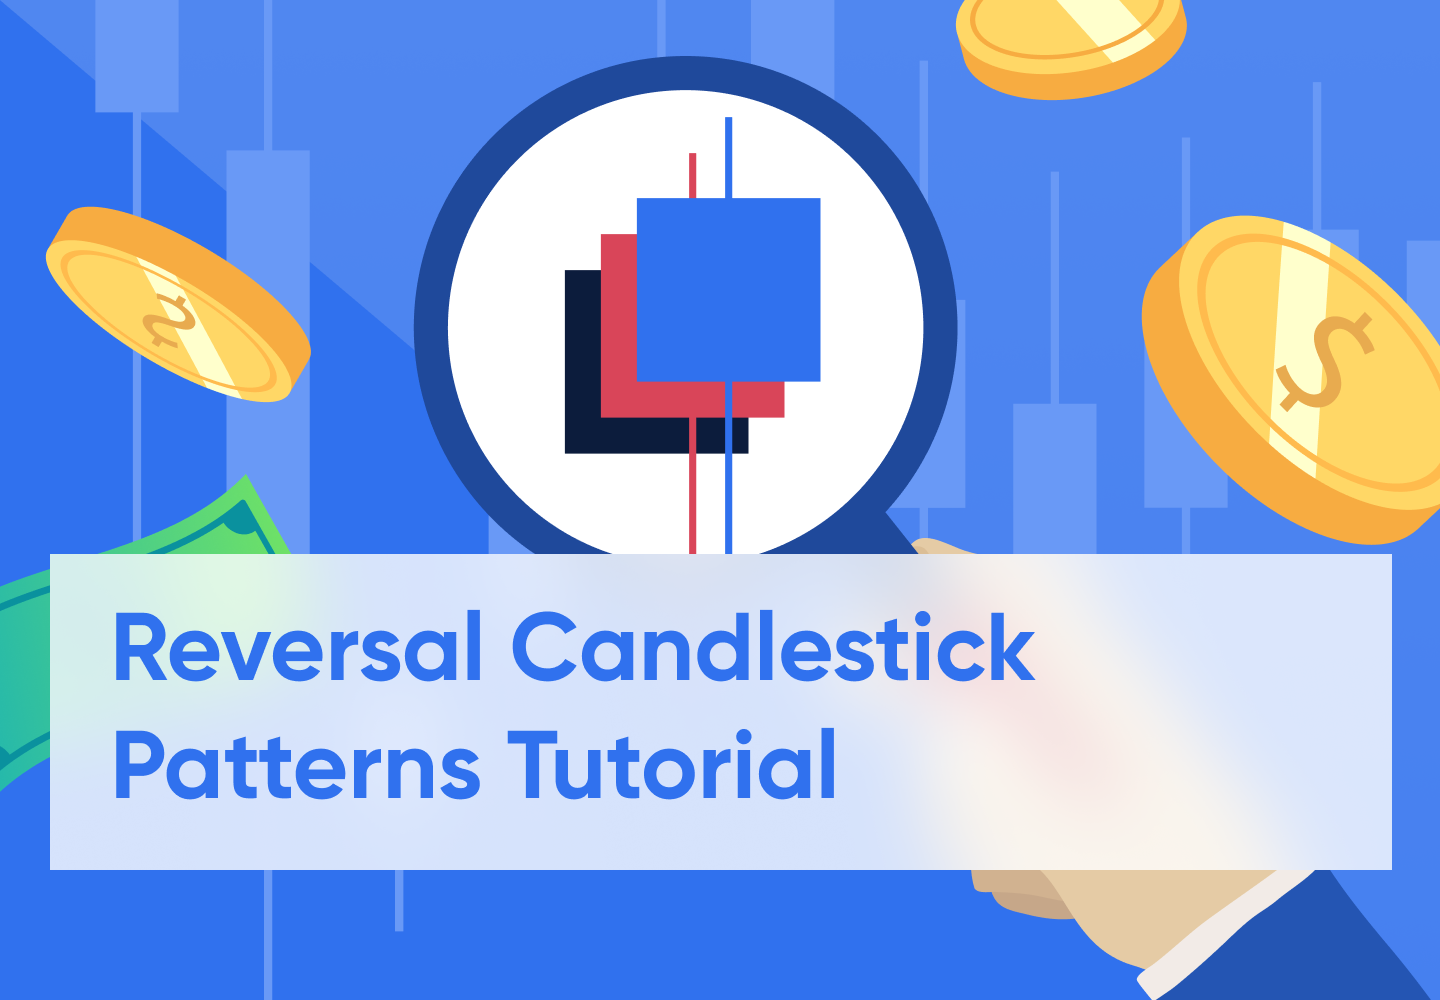 What Is a Reversal Candlestick Pattern?